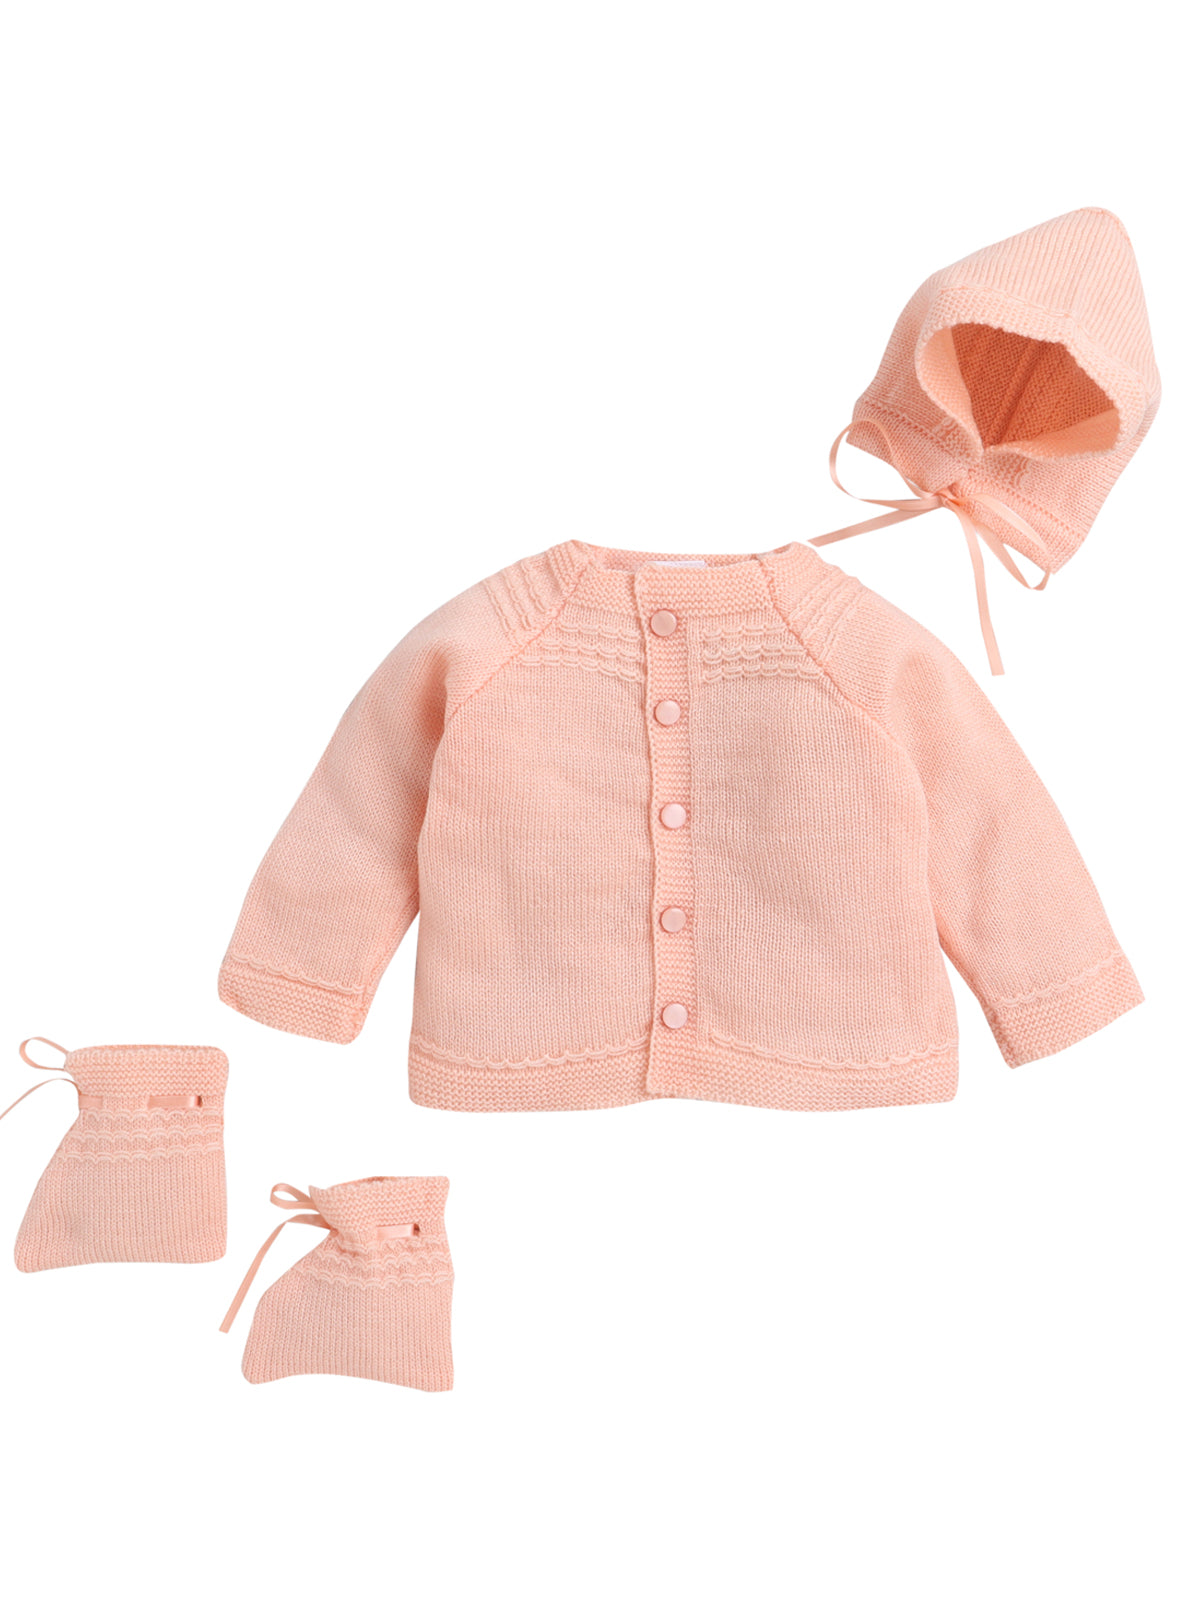 Full Sleeves Front Open Peach Color Self Design Sweater Set With Matching Caps and Socks for Baby